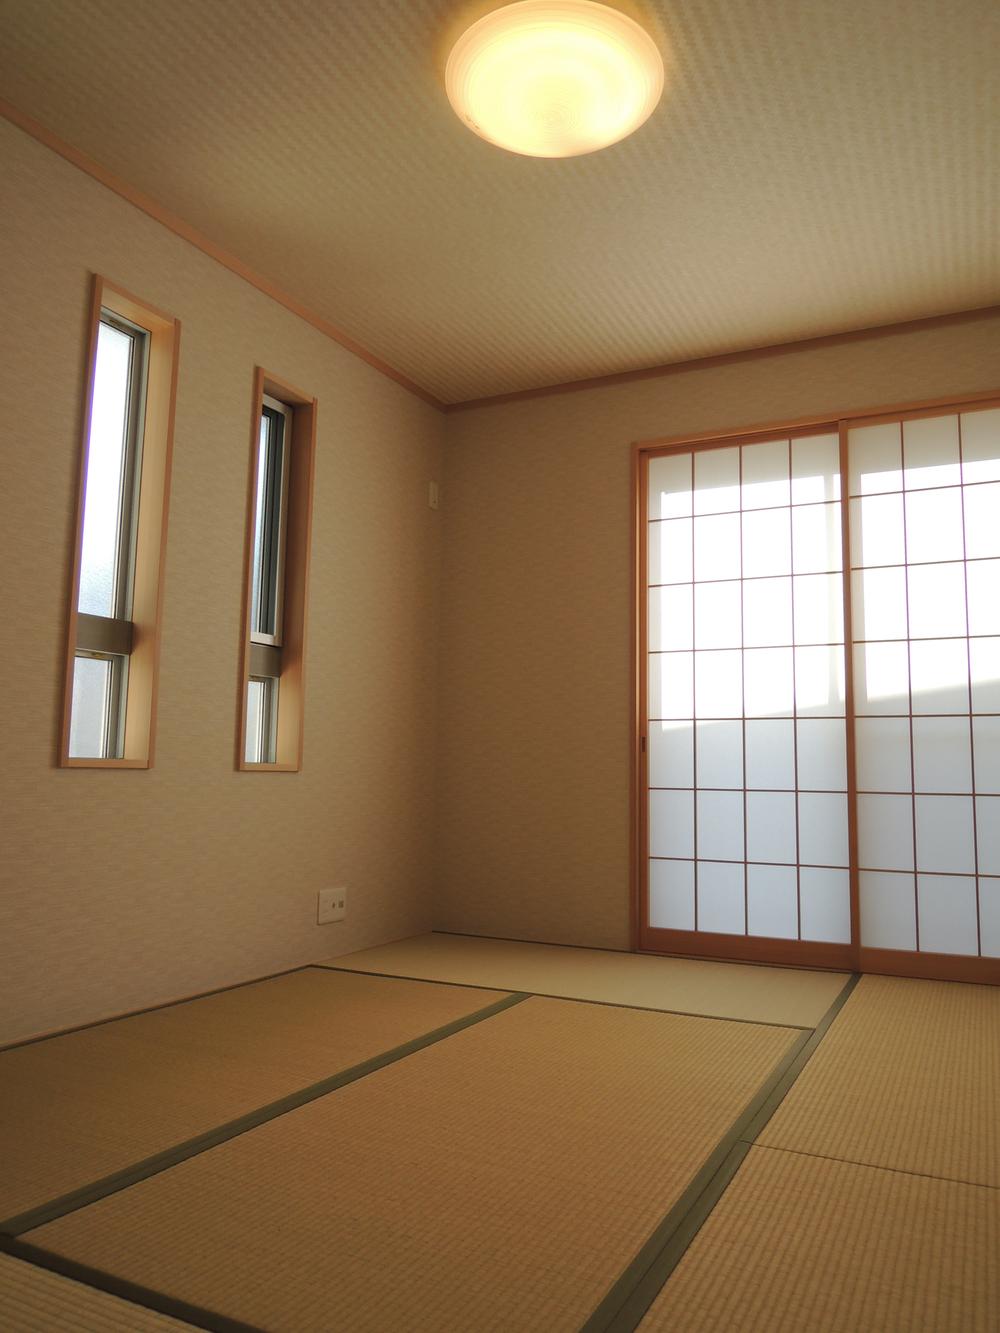 Non-living room. Local (December 2013) captured the first floor Japanese-style room